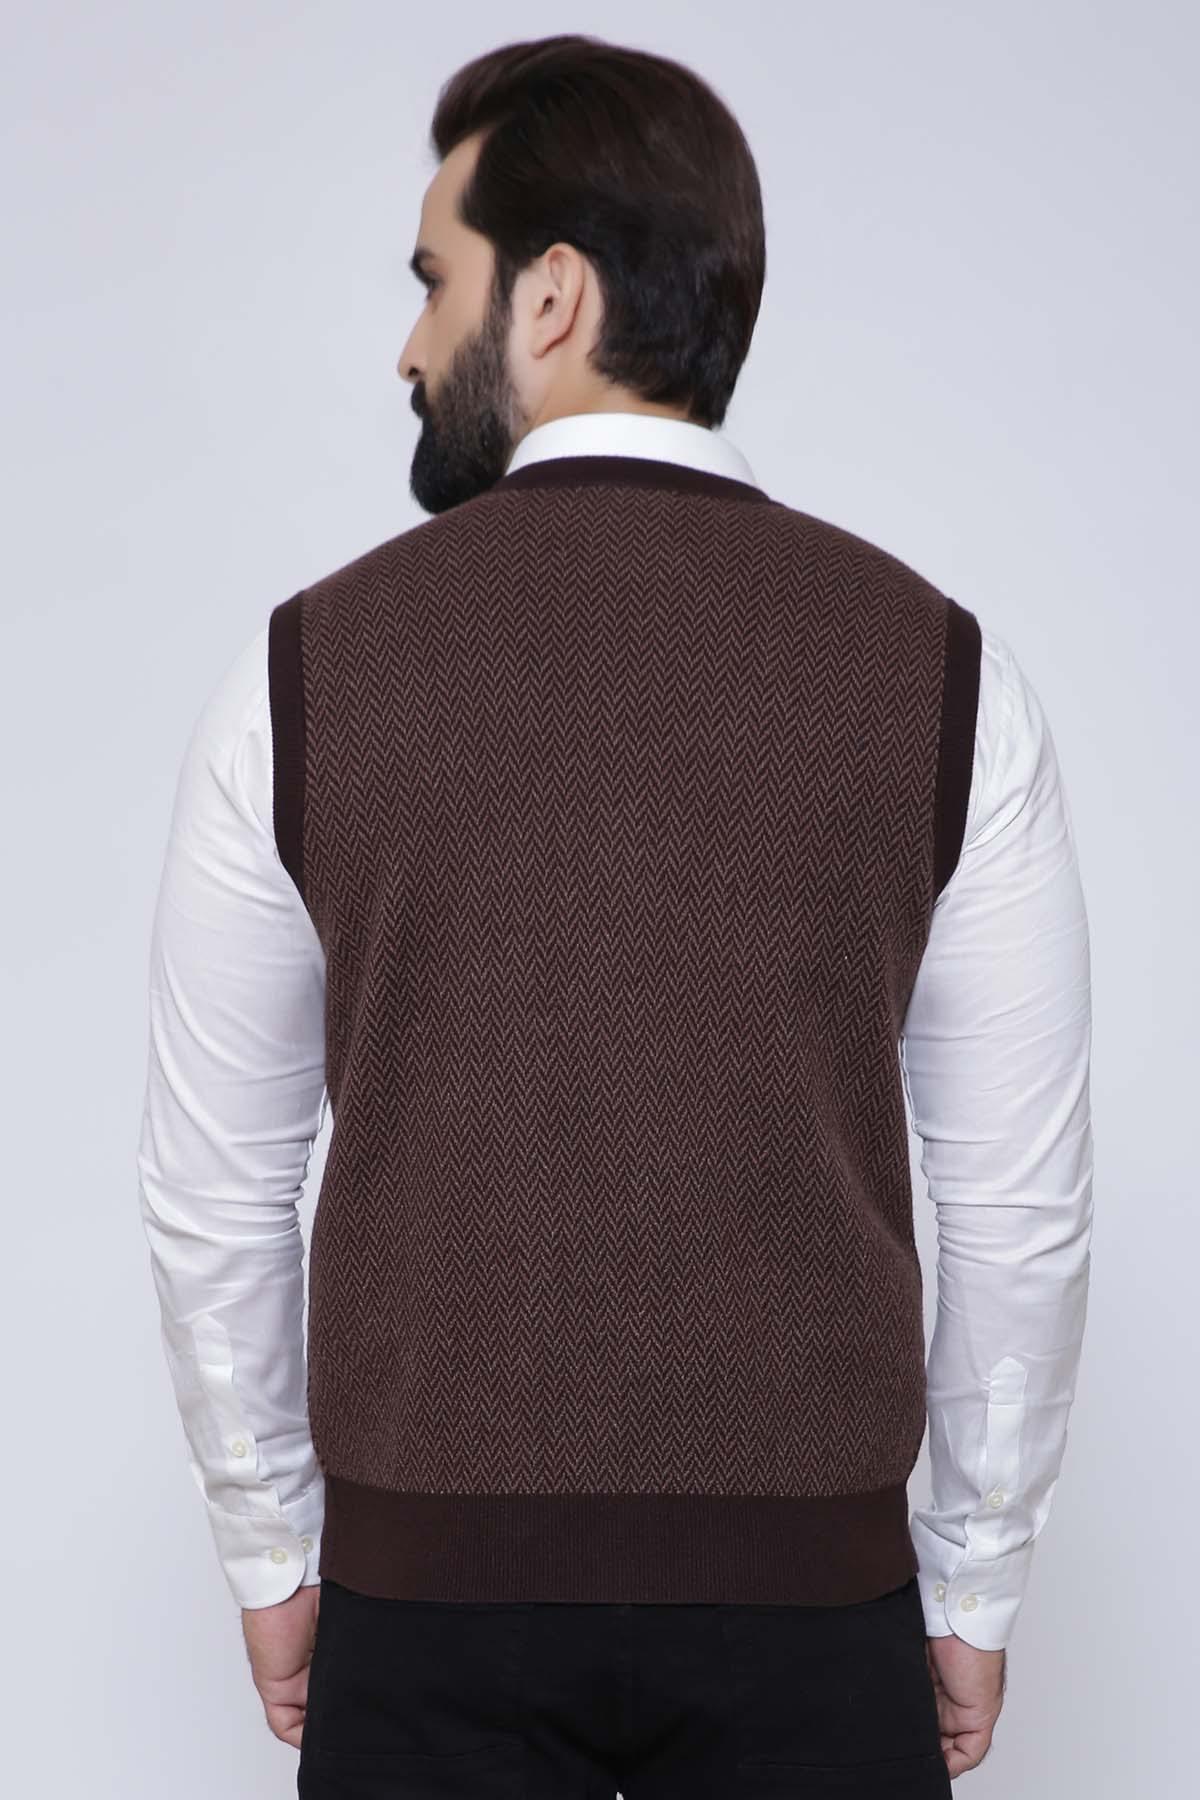 SWEATER CARDIGAN SLEEVE LESS BROWN at Charcoal Clothing